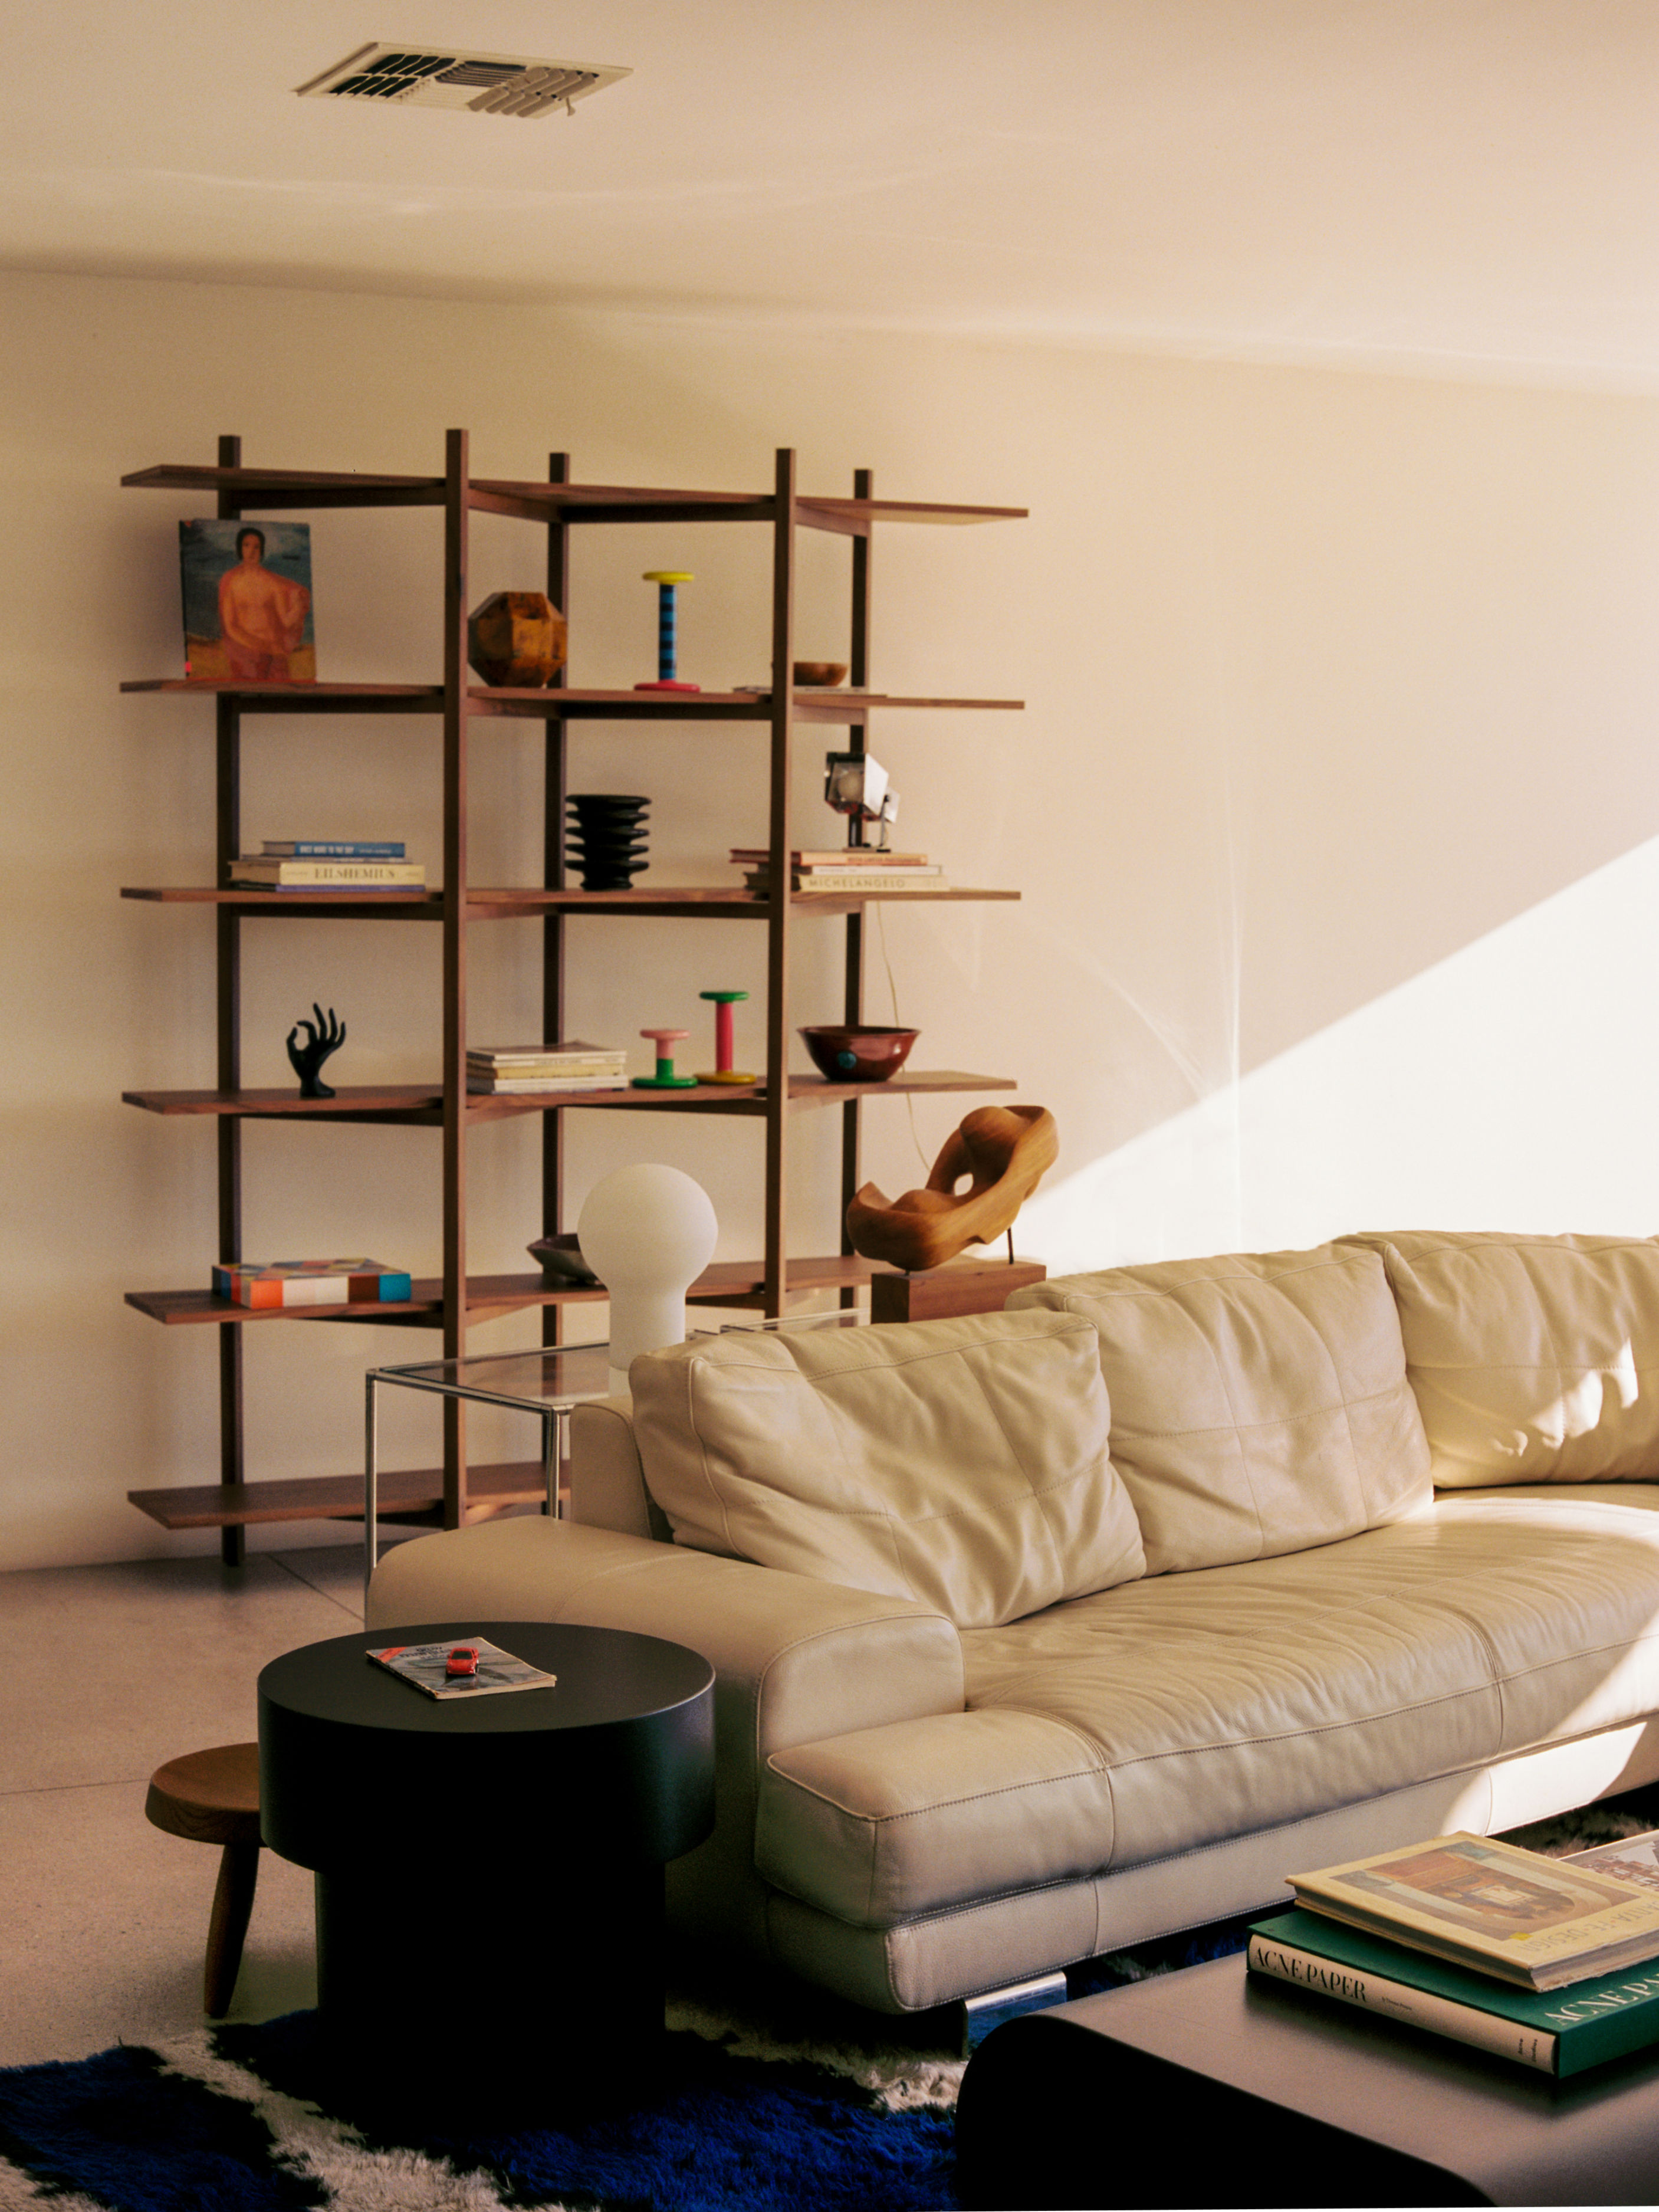 Shelving and storage